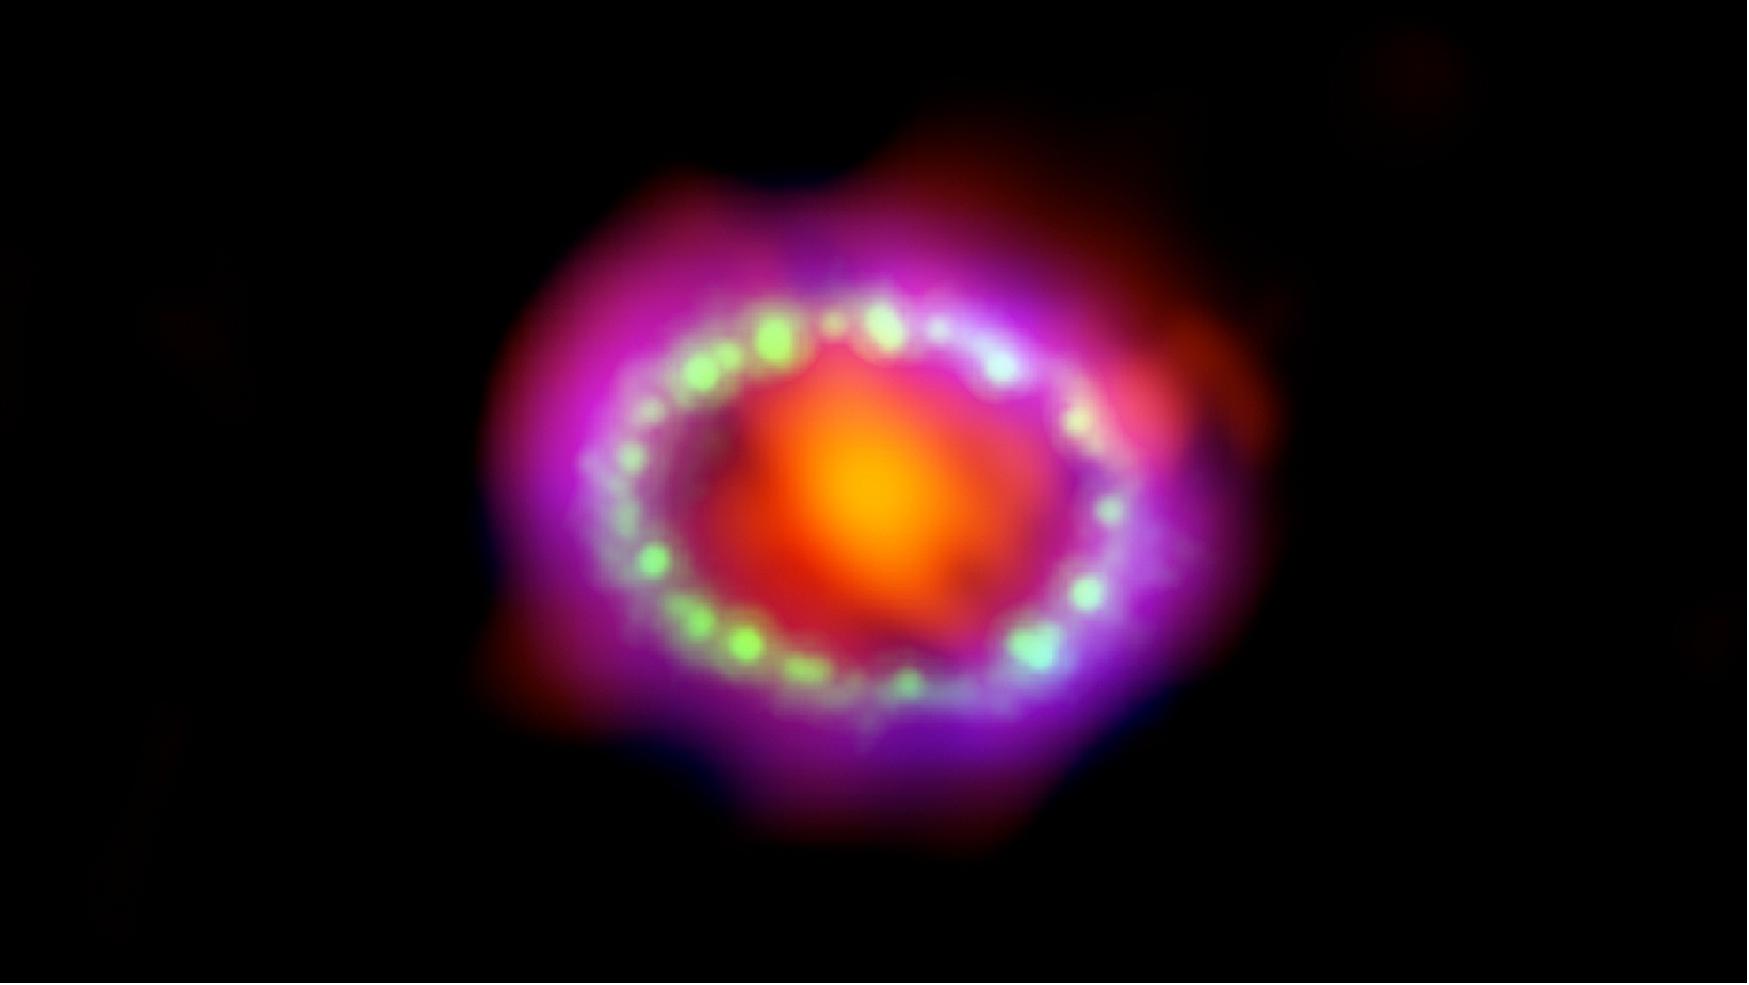 Figure 28: Multiwavelength view of Supernova 1987A. Astronomers combined observations from three different observatories ALMA (Atacama Large Millimeter/submillimeter Array), red; Hubble, green; Chandra X-ray Observatory, blue) to produce this colorful, multiwavelength image of the intricate remains of Supernova 1987A [image credit: NASA, ESA, A. Angelich (NRAO/AUI/NSF); Hubble credit: NASA, ESA, R. Kirshner; Chandra credit: NASA/CXC/Penn State/K. Frank et al.; ALMA credit: ALMA (ESO/NAOJ/NRAO) and R. Indebetouw (NRAO/AUI/NSF)]